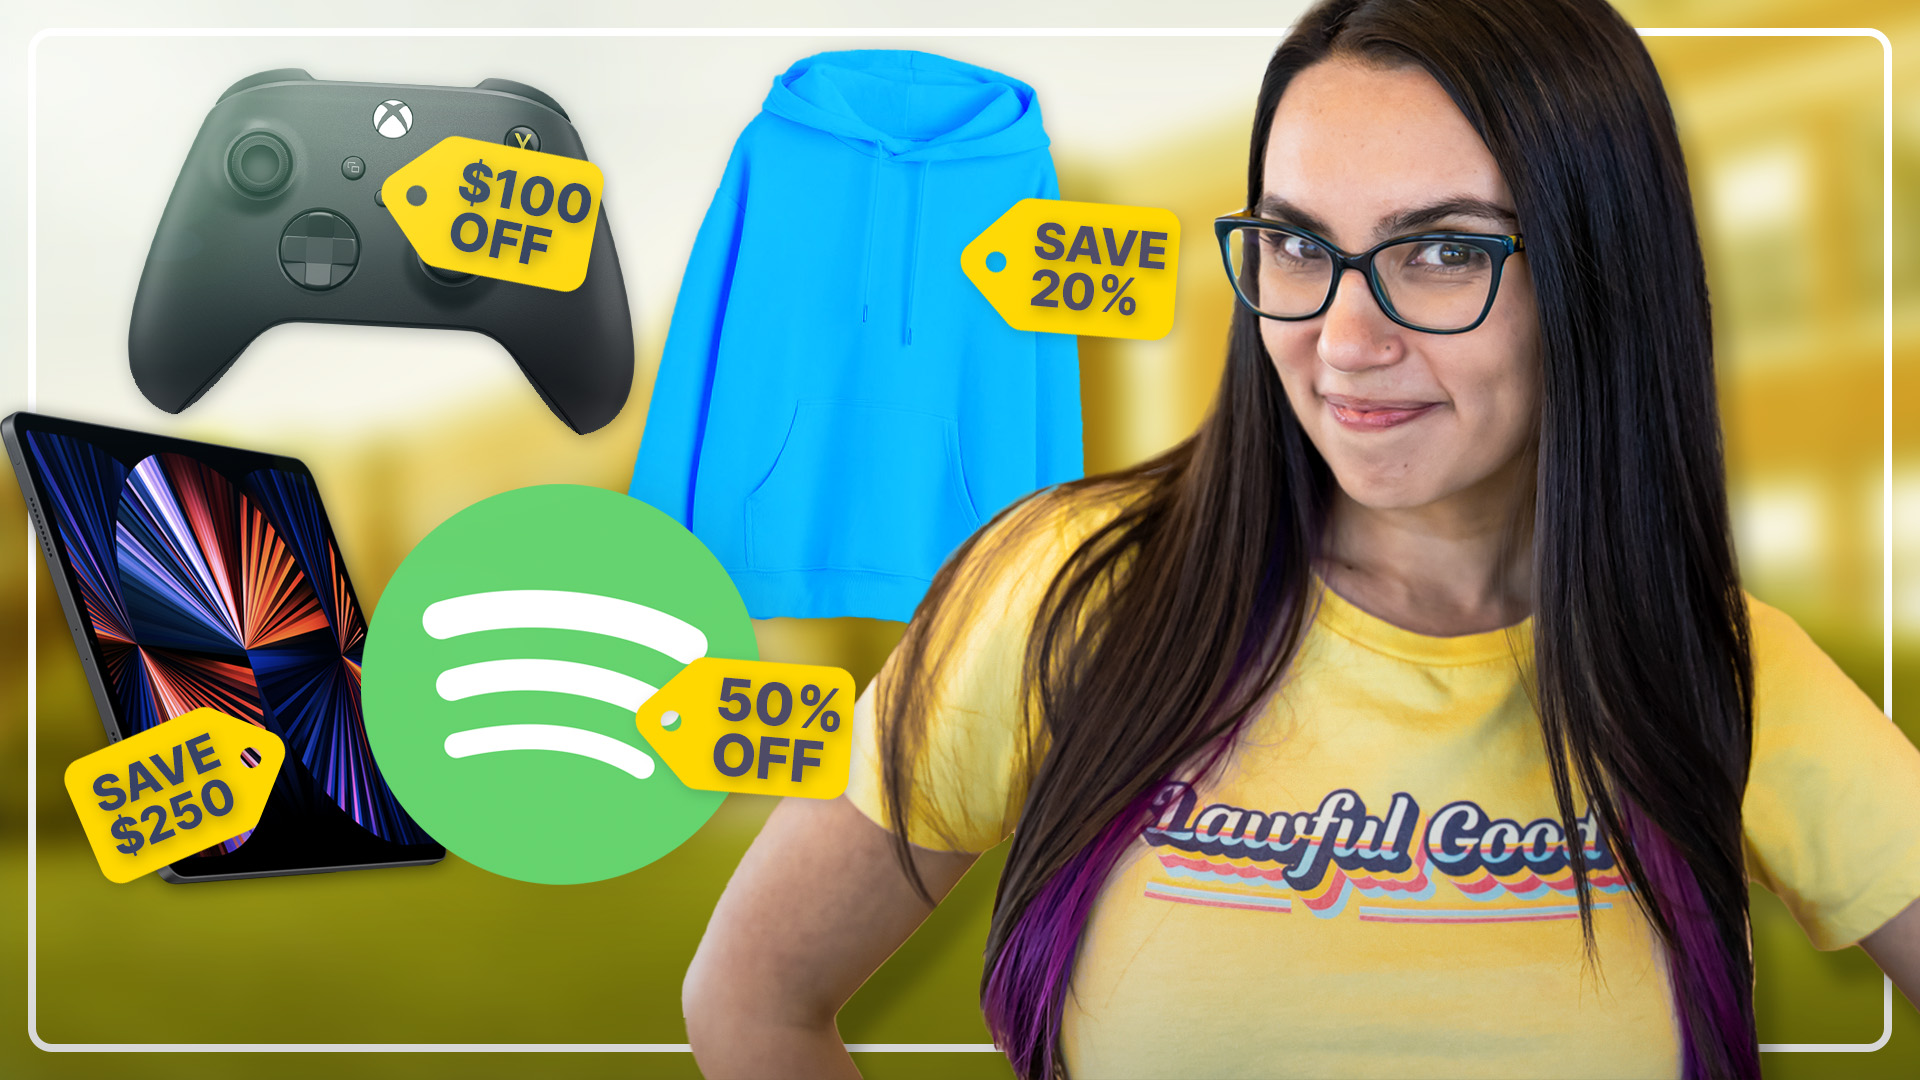 Trisha Hershberger with deals on clothes, music streaming spotify and game consoles xbox hero